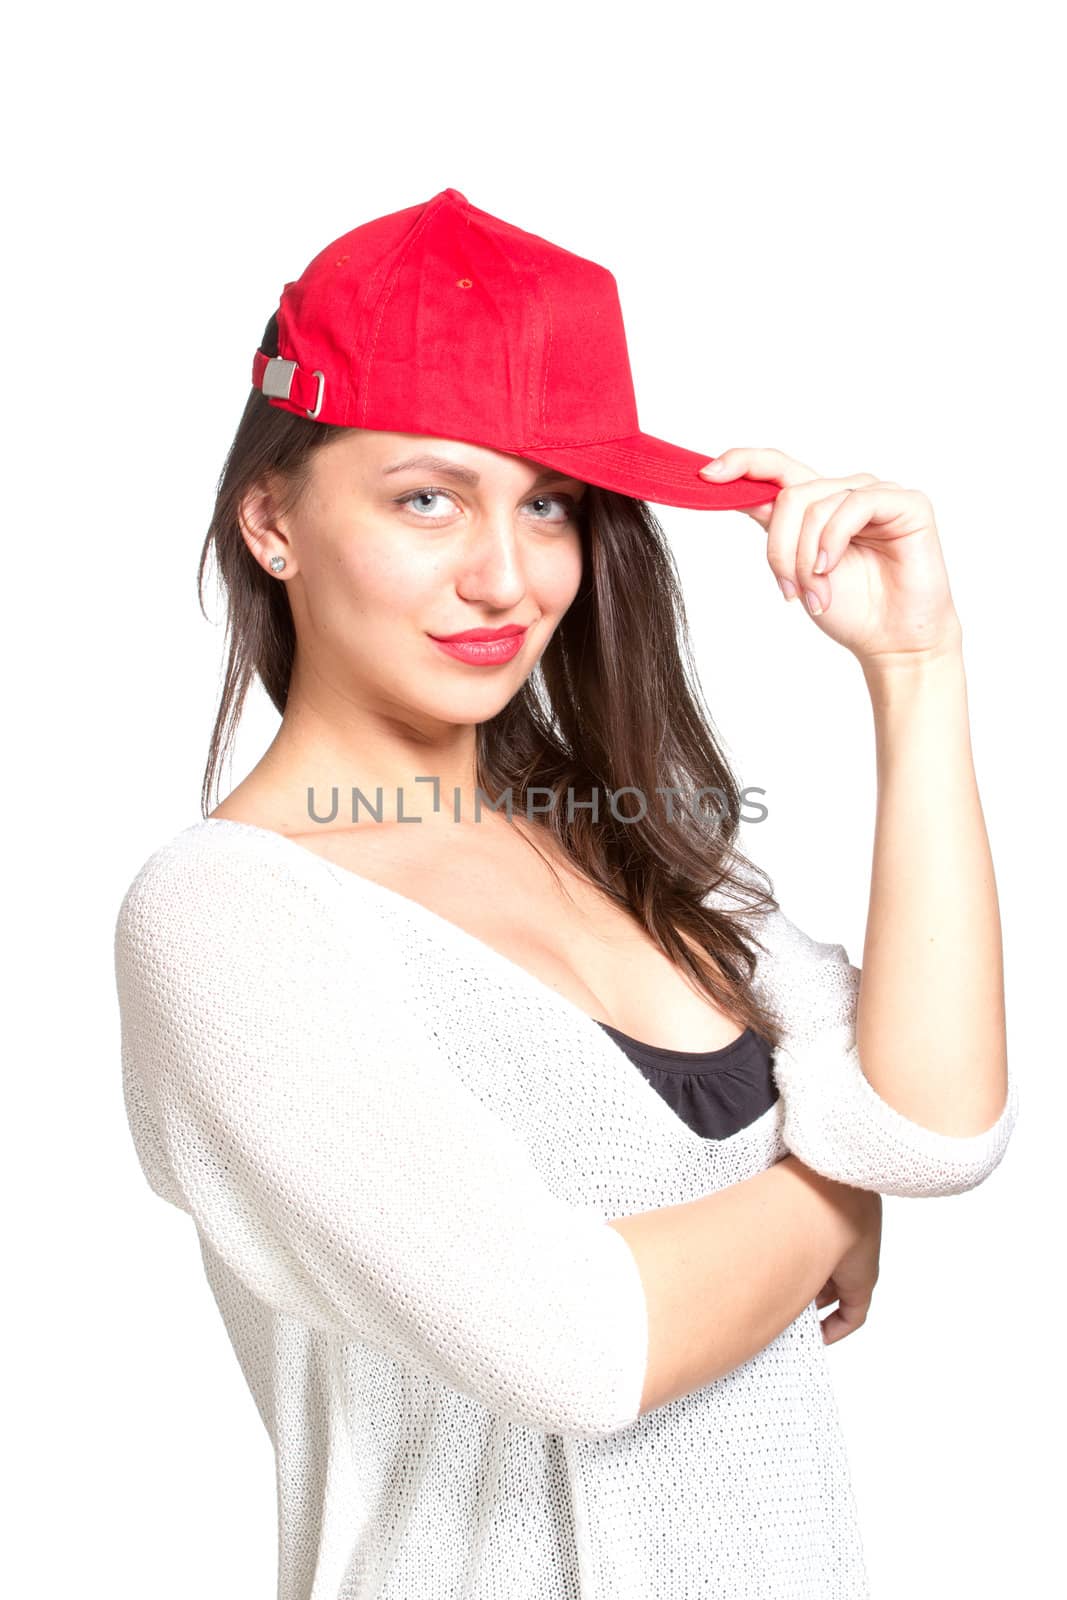 Attractive young woman wearing a red baseball cap by gsdonlin